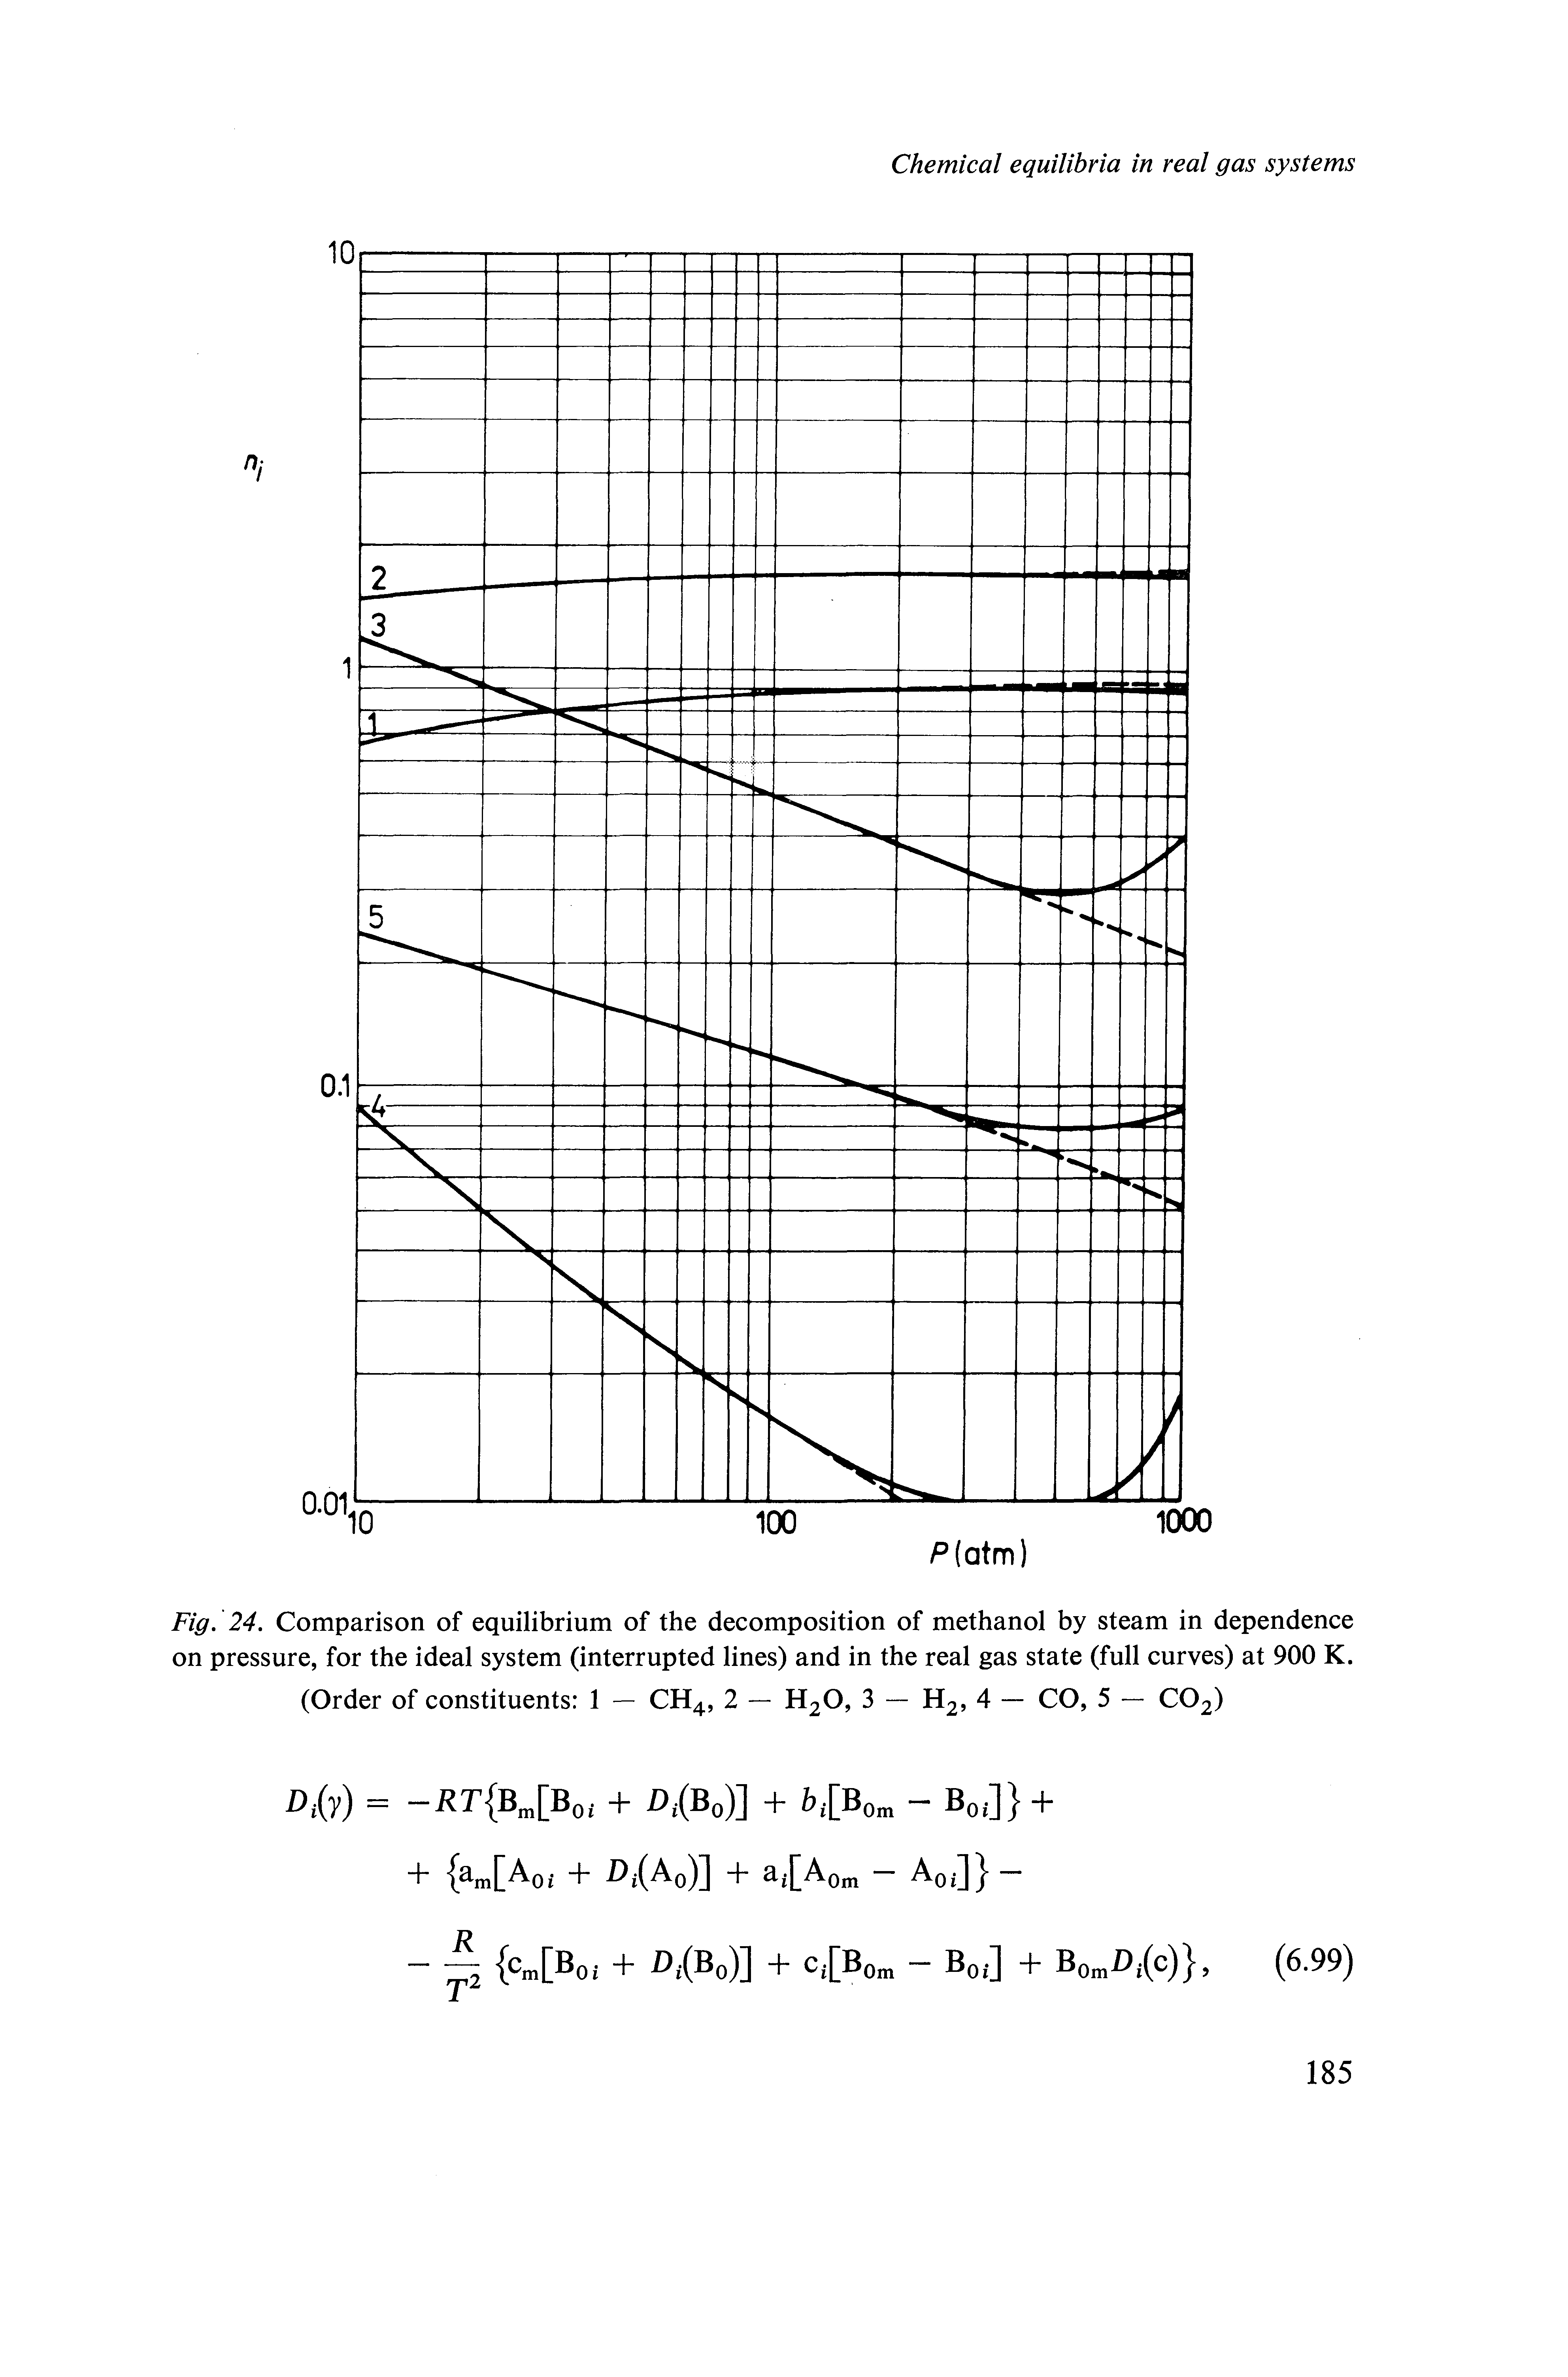 Fig. 24. Comparison of equilibrium of the decomposition of methanol by steam in dependence on pressure, for the ideal system (interrupted lines) and in the real gas state (full curves) at 900 K. (Order of constituents 1 — CH4, 2 — H2O, 3 — H2, 4 — CO, 5 — CO2)...